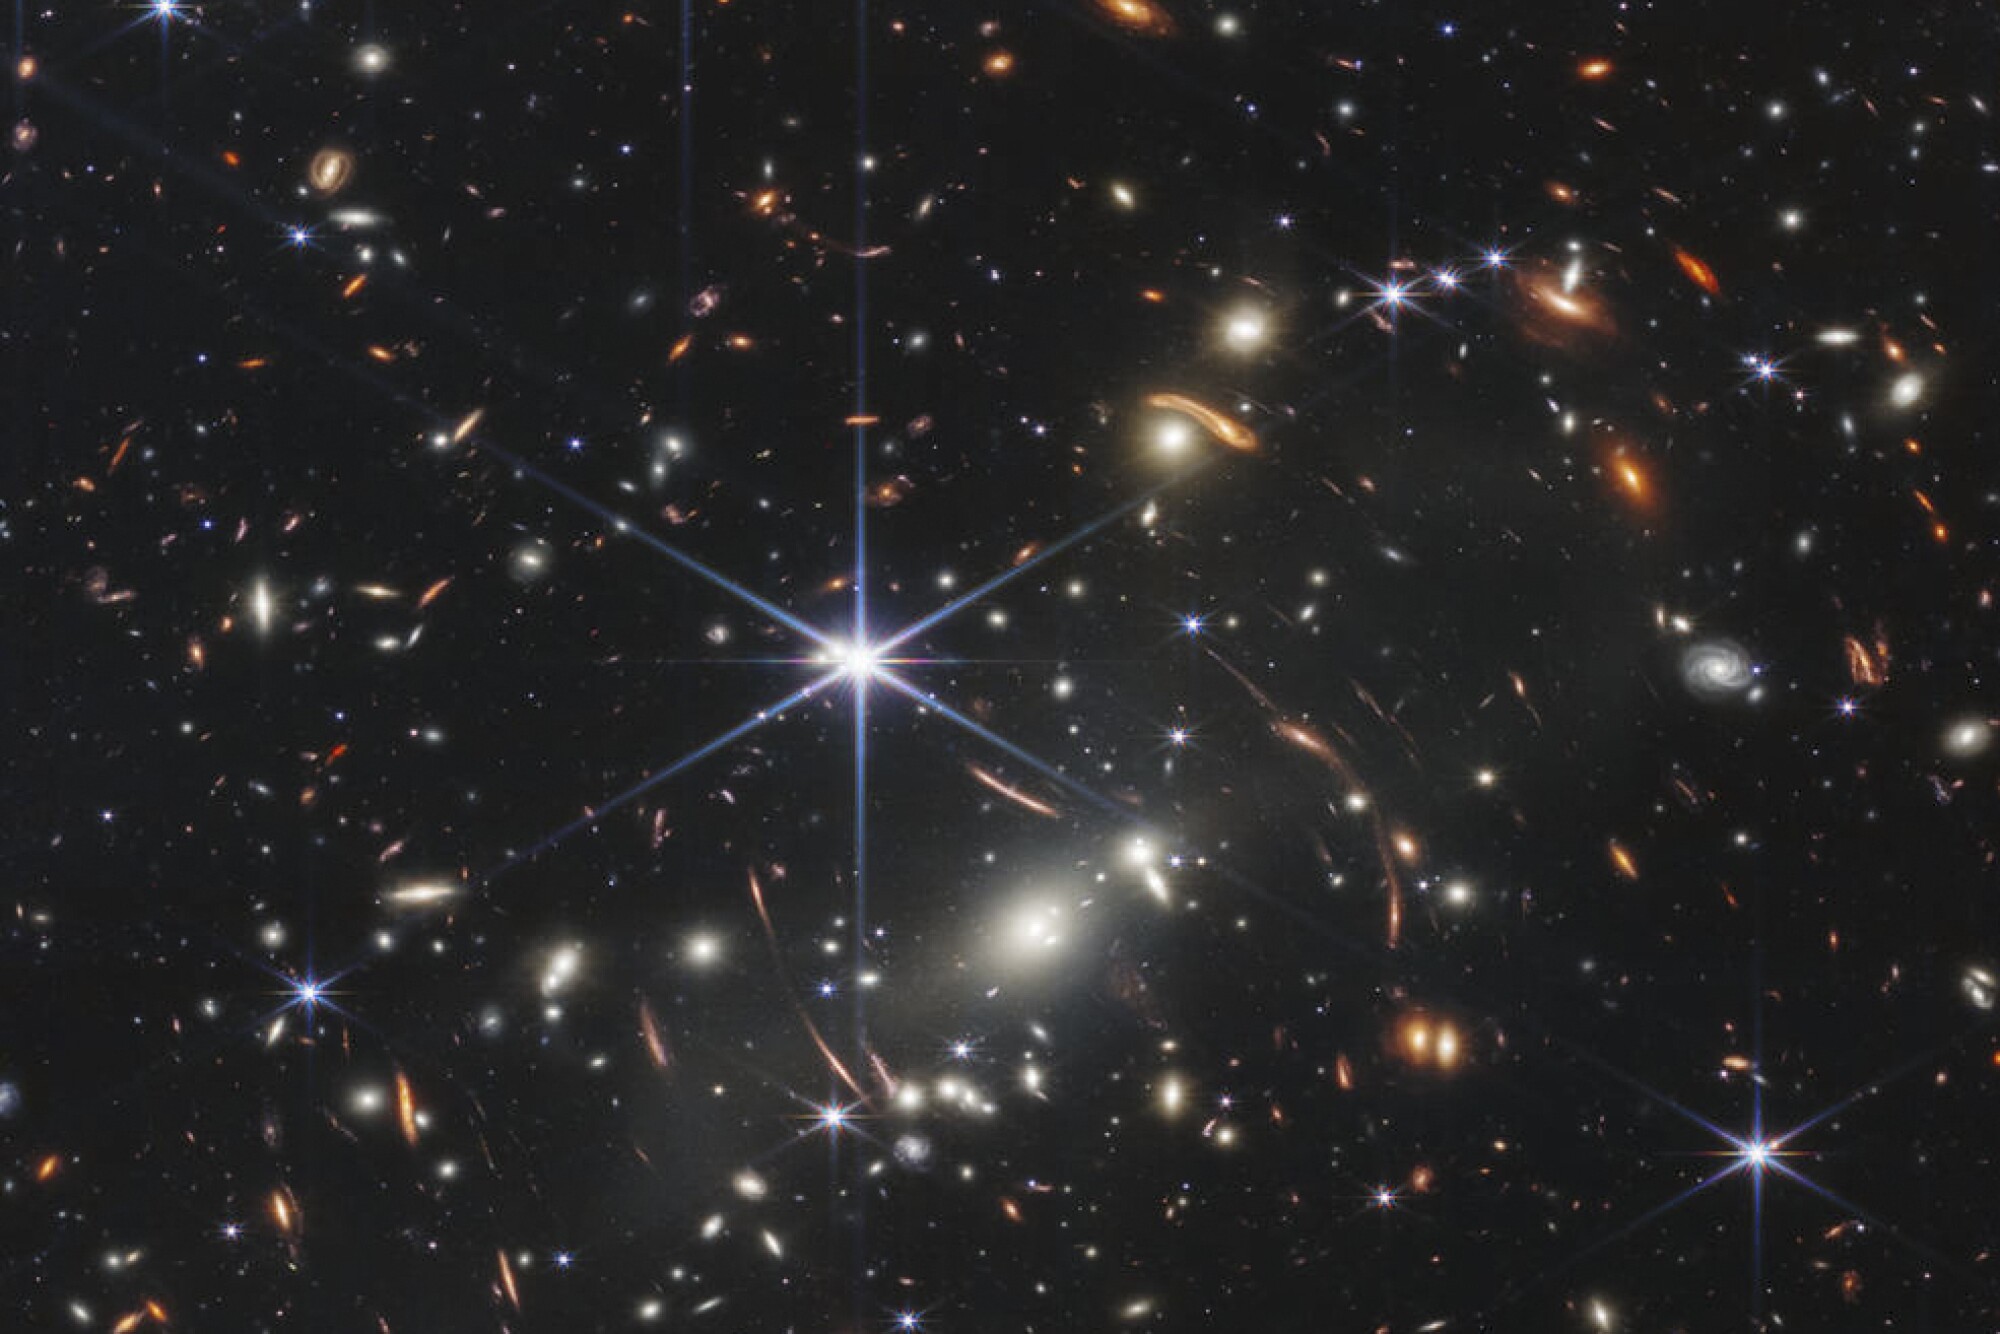 This image provided by NASA on Monday, July 11, 2022, shows galaxy cluster SMACS 0723